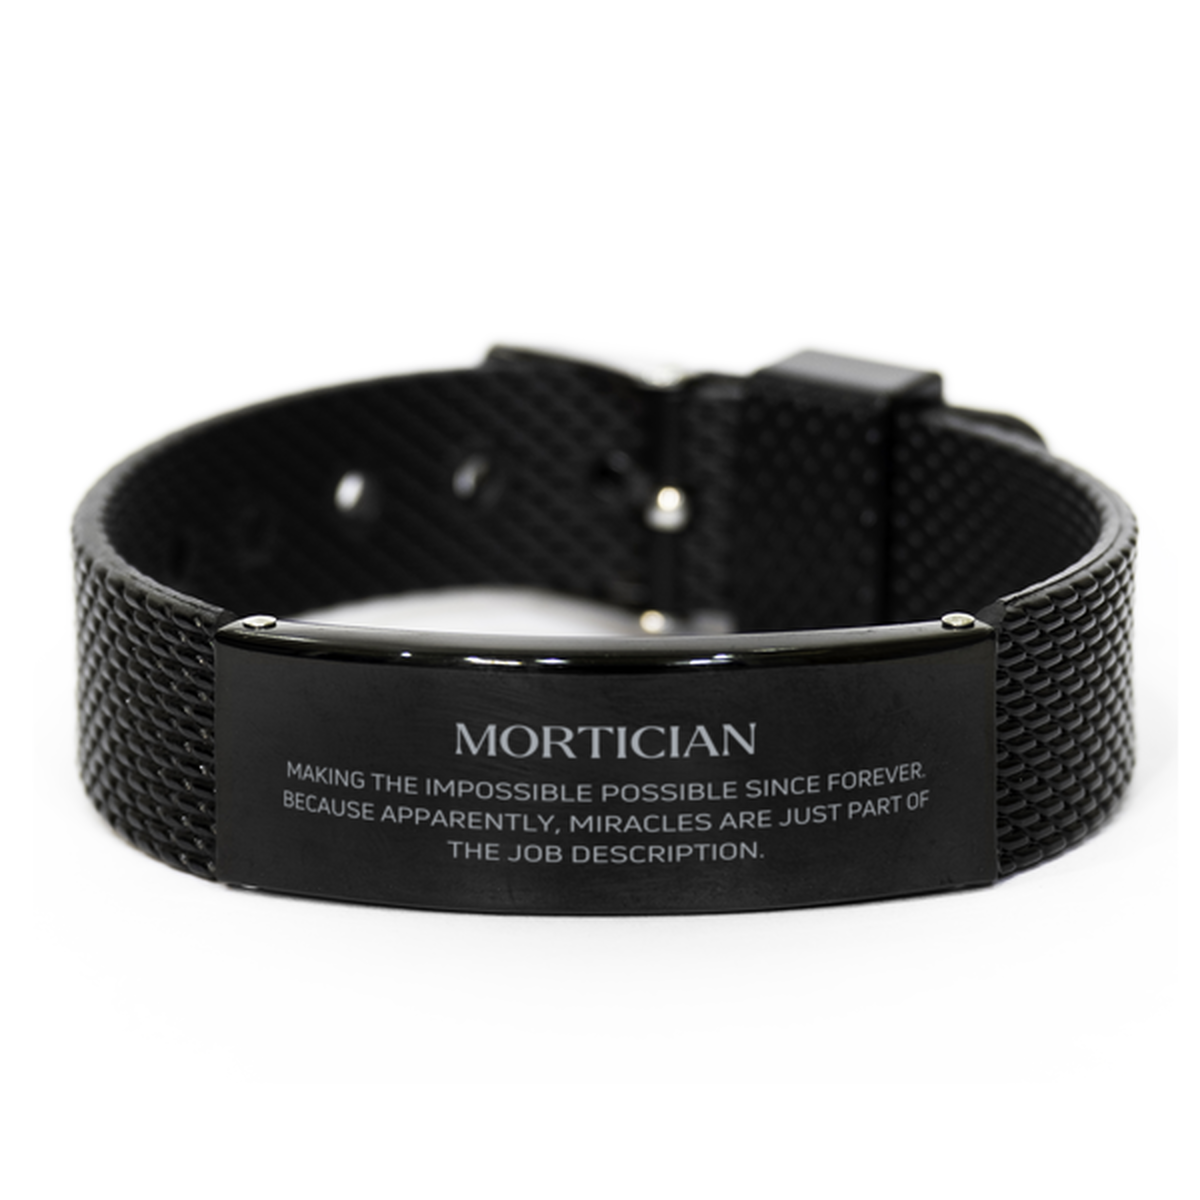 Funny Mortician Gifts, Miracles are just part of the job description, Inspirational Birthday Black Shark Mesh Bracelet For Mortician, Men, Women, Coworkers, Friends, Boss